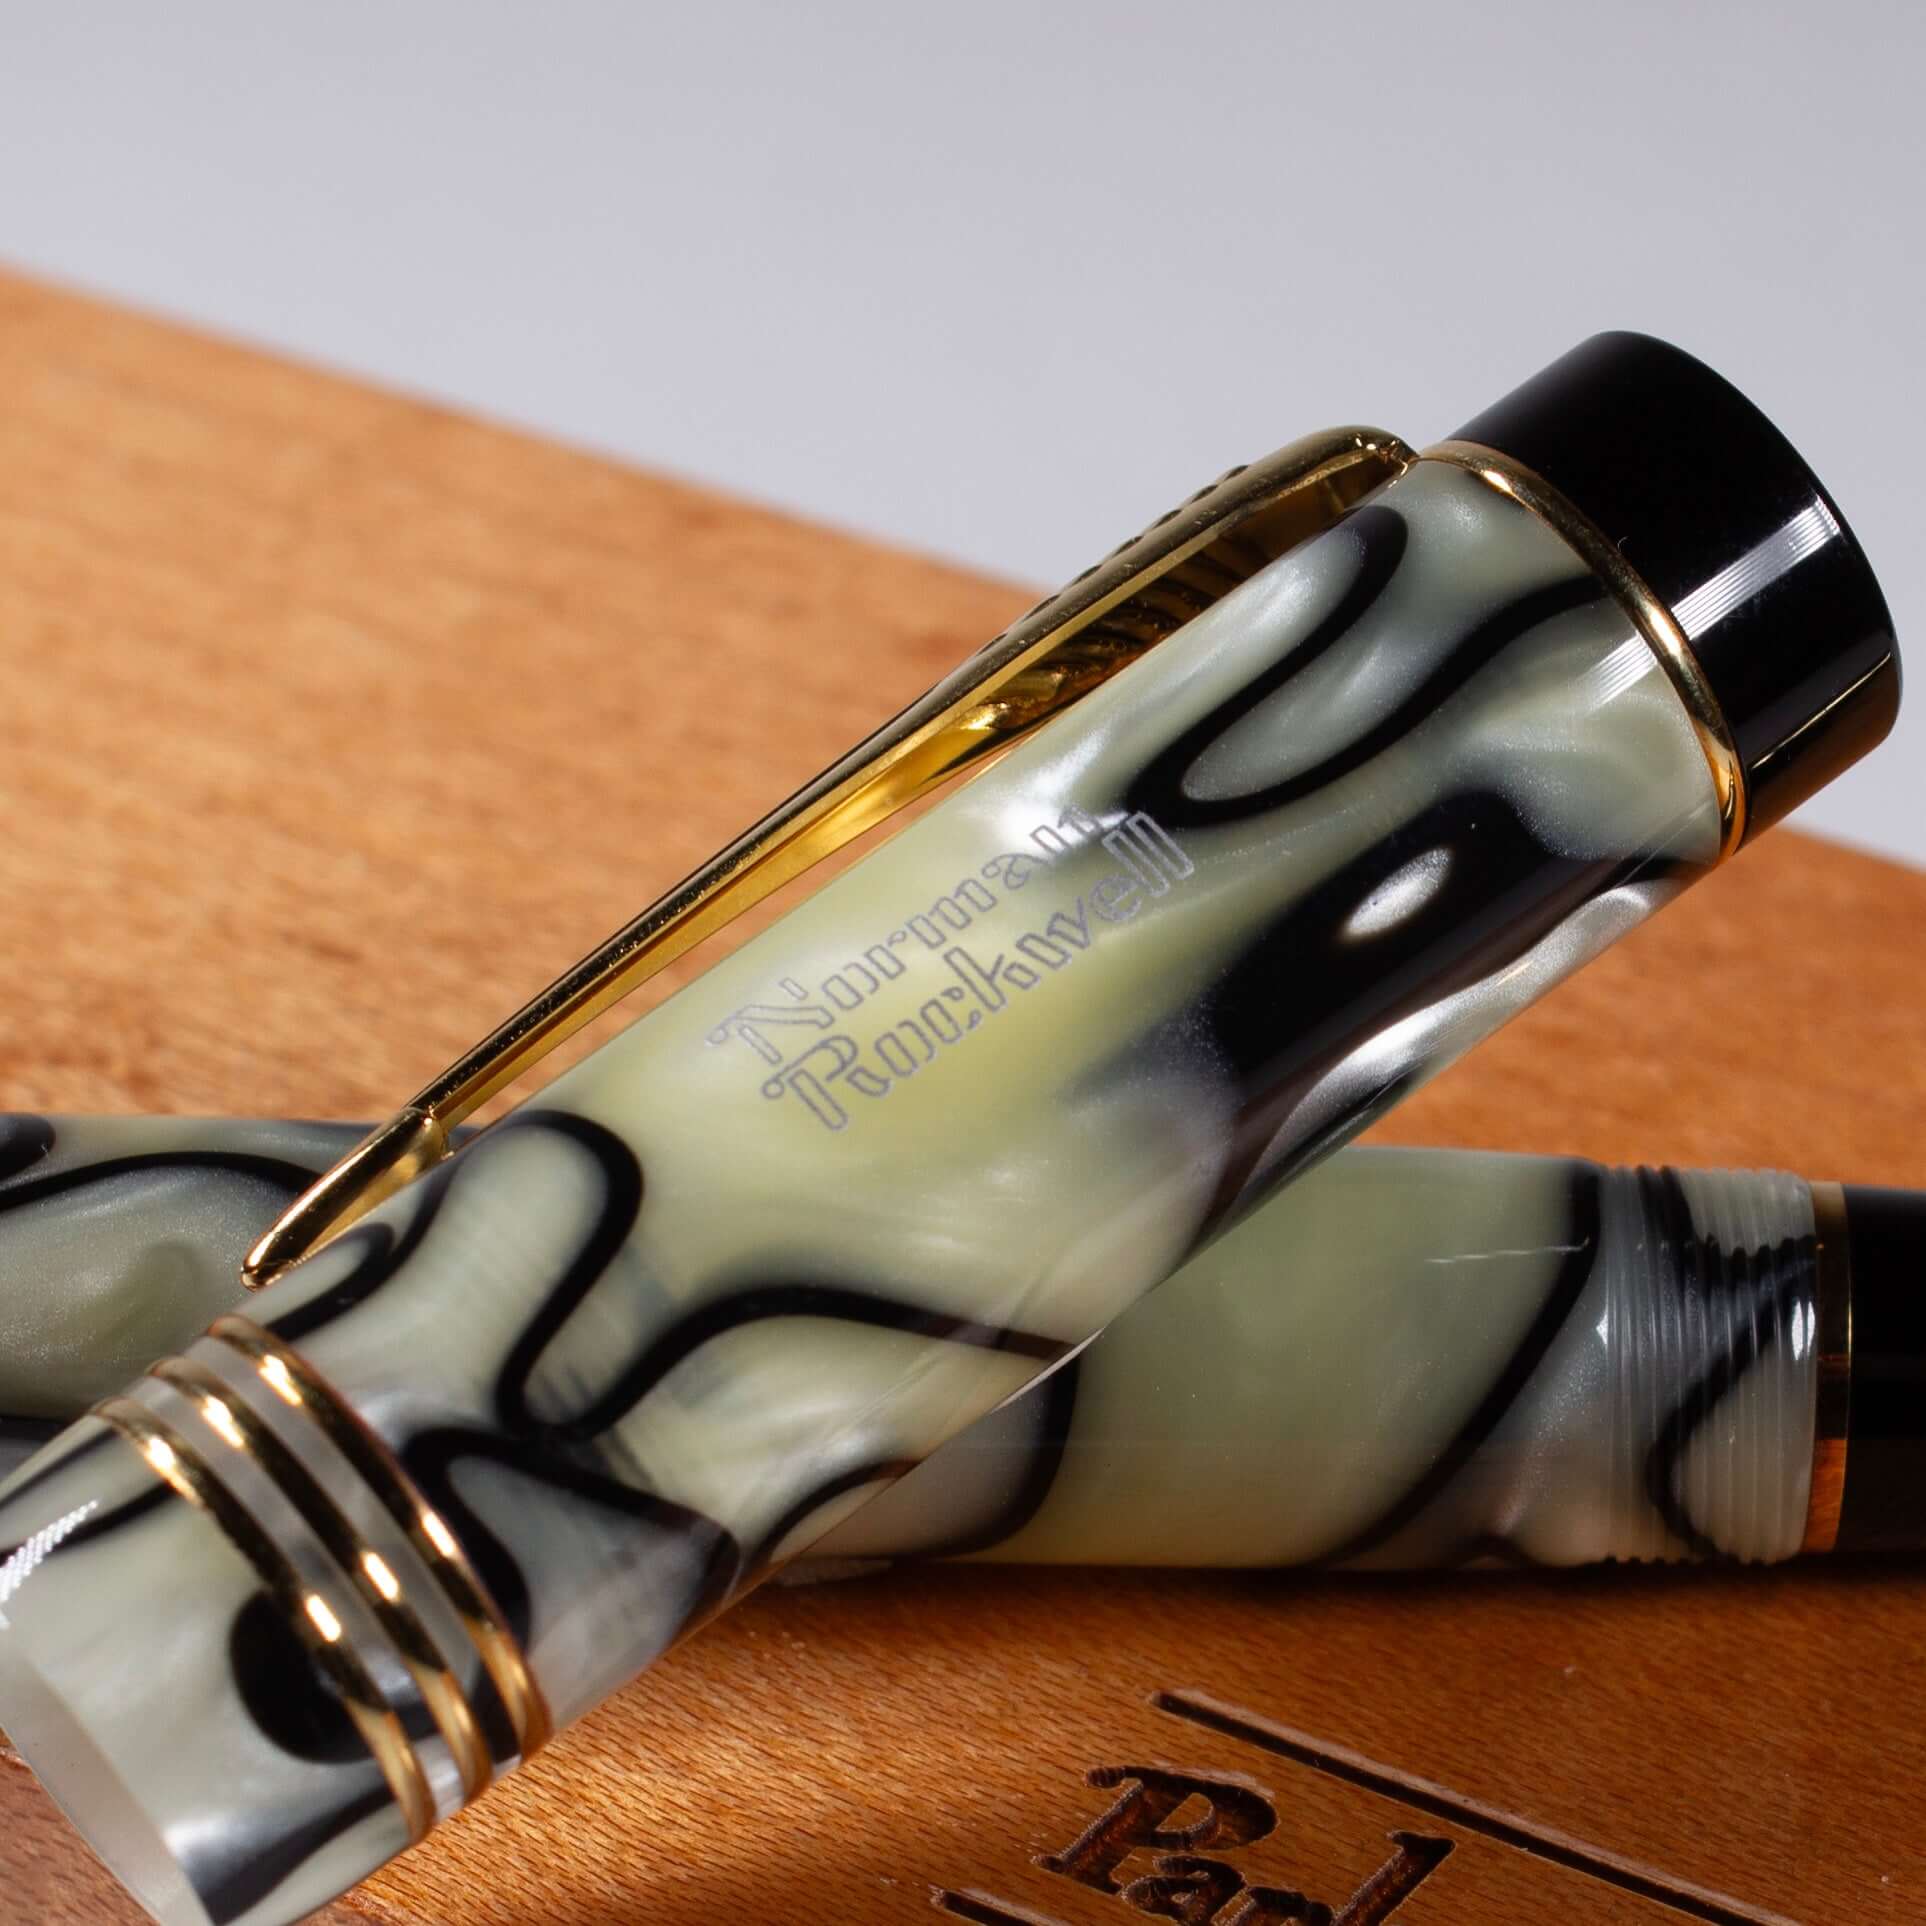 Parker Duofold Norman Rockwell Limited Edition Black and Pearl Fountain Pen, 18K Medium nib. This Parker Duofold Norman Rockwell Limited Edition Fountain Pen is number 1306 of only 3,500 produced. It features a black and pearl swirl pattern only used for